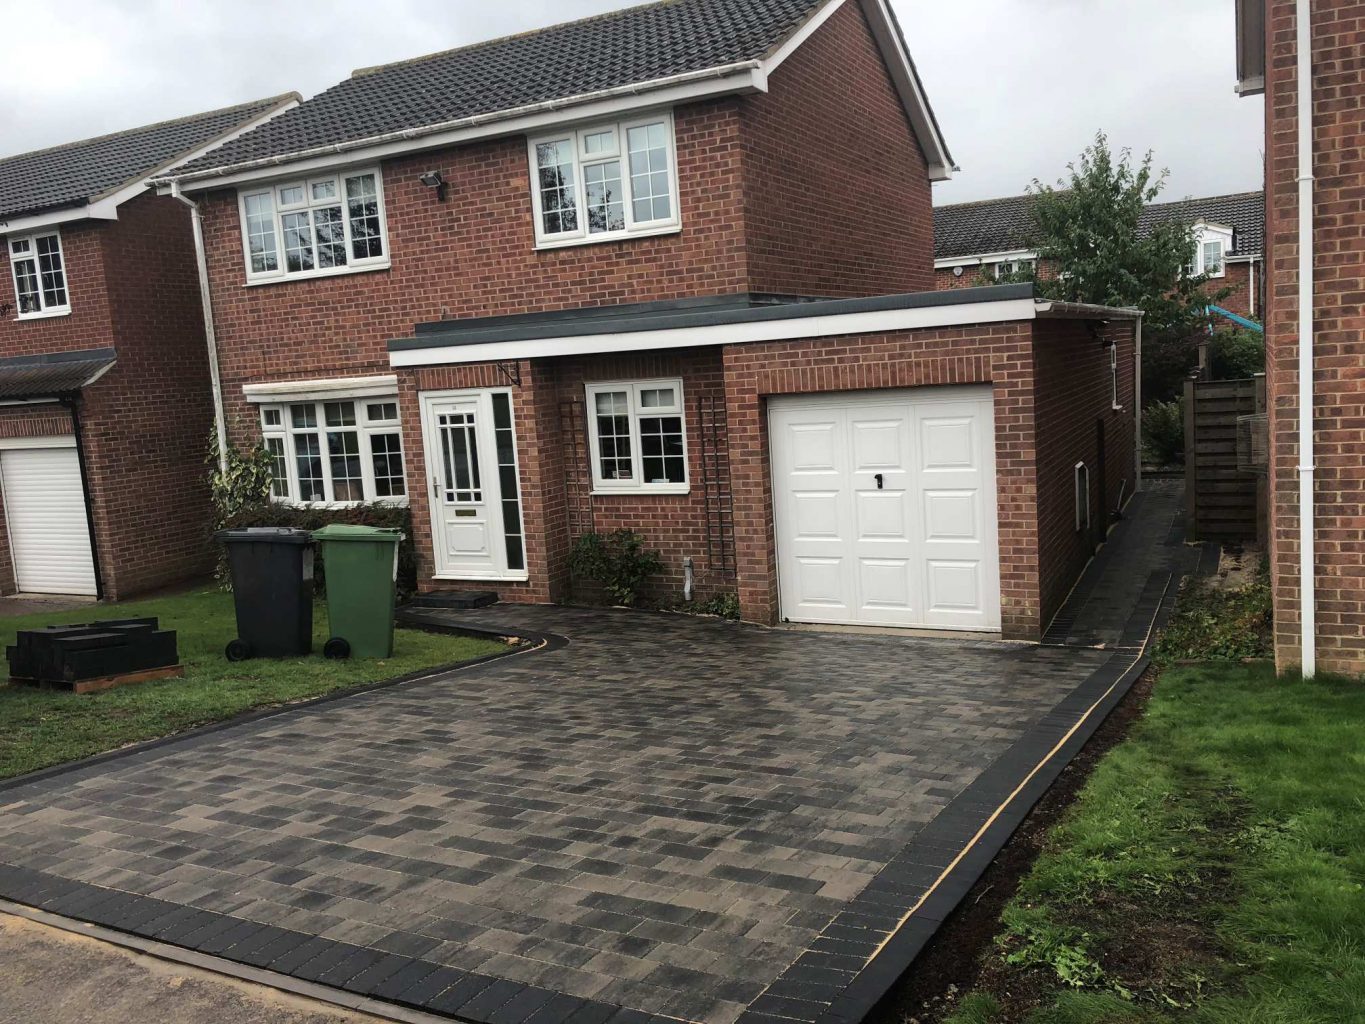 Driveway installed by Peterborough Block Paving Co